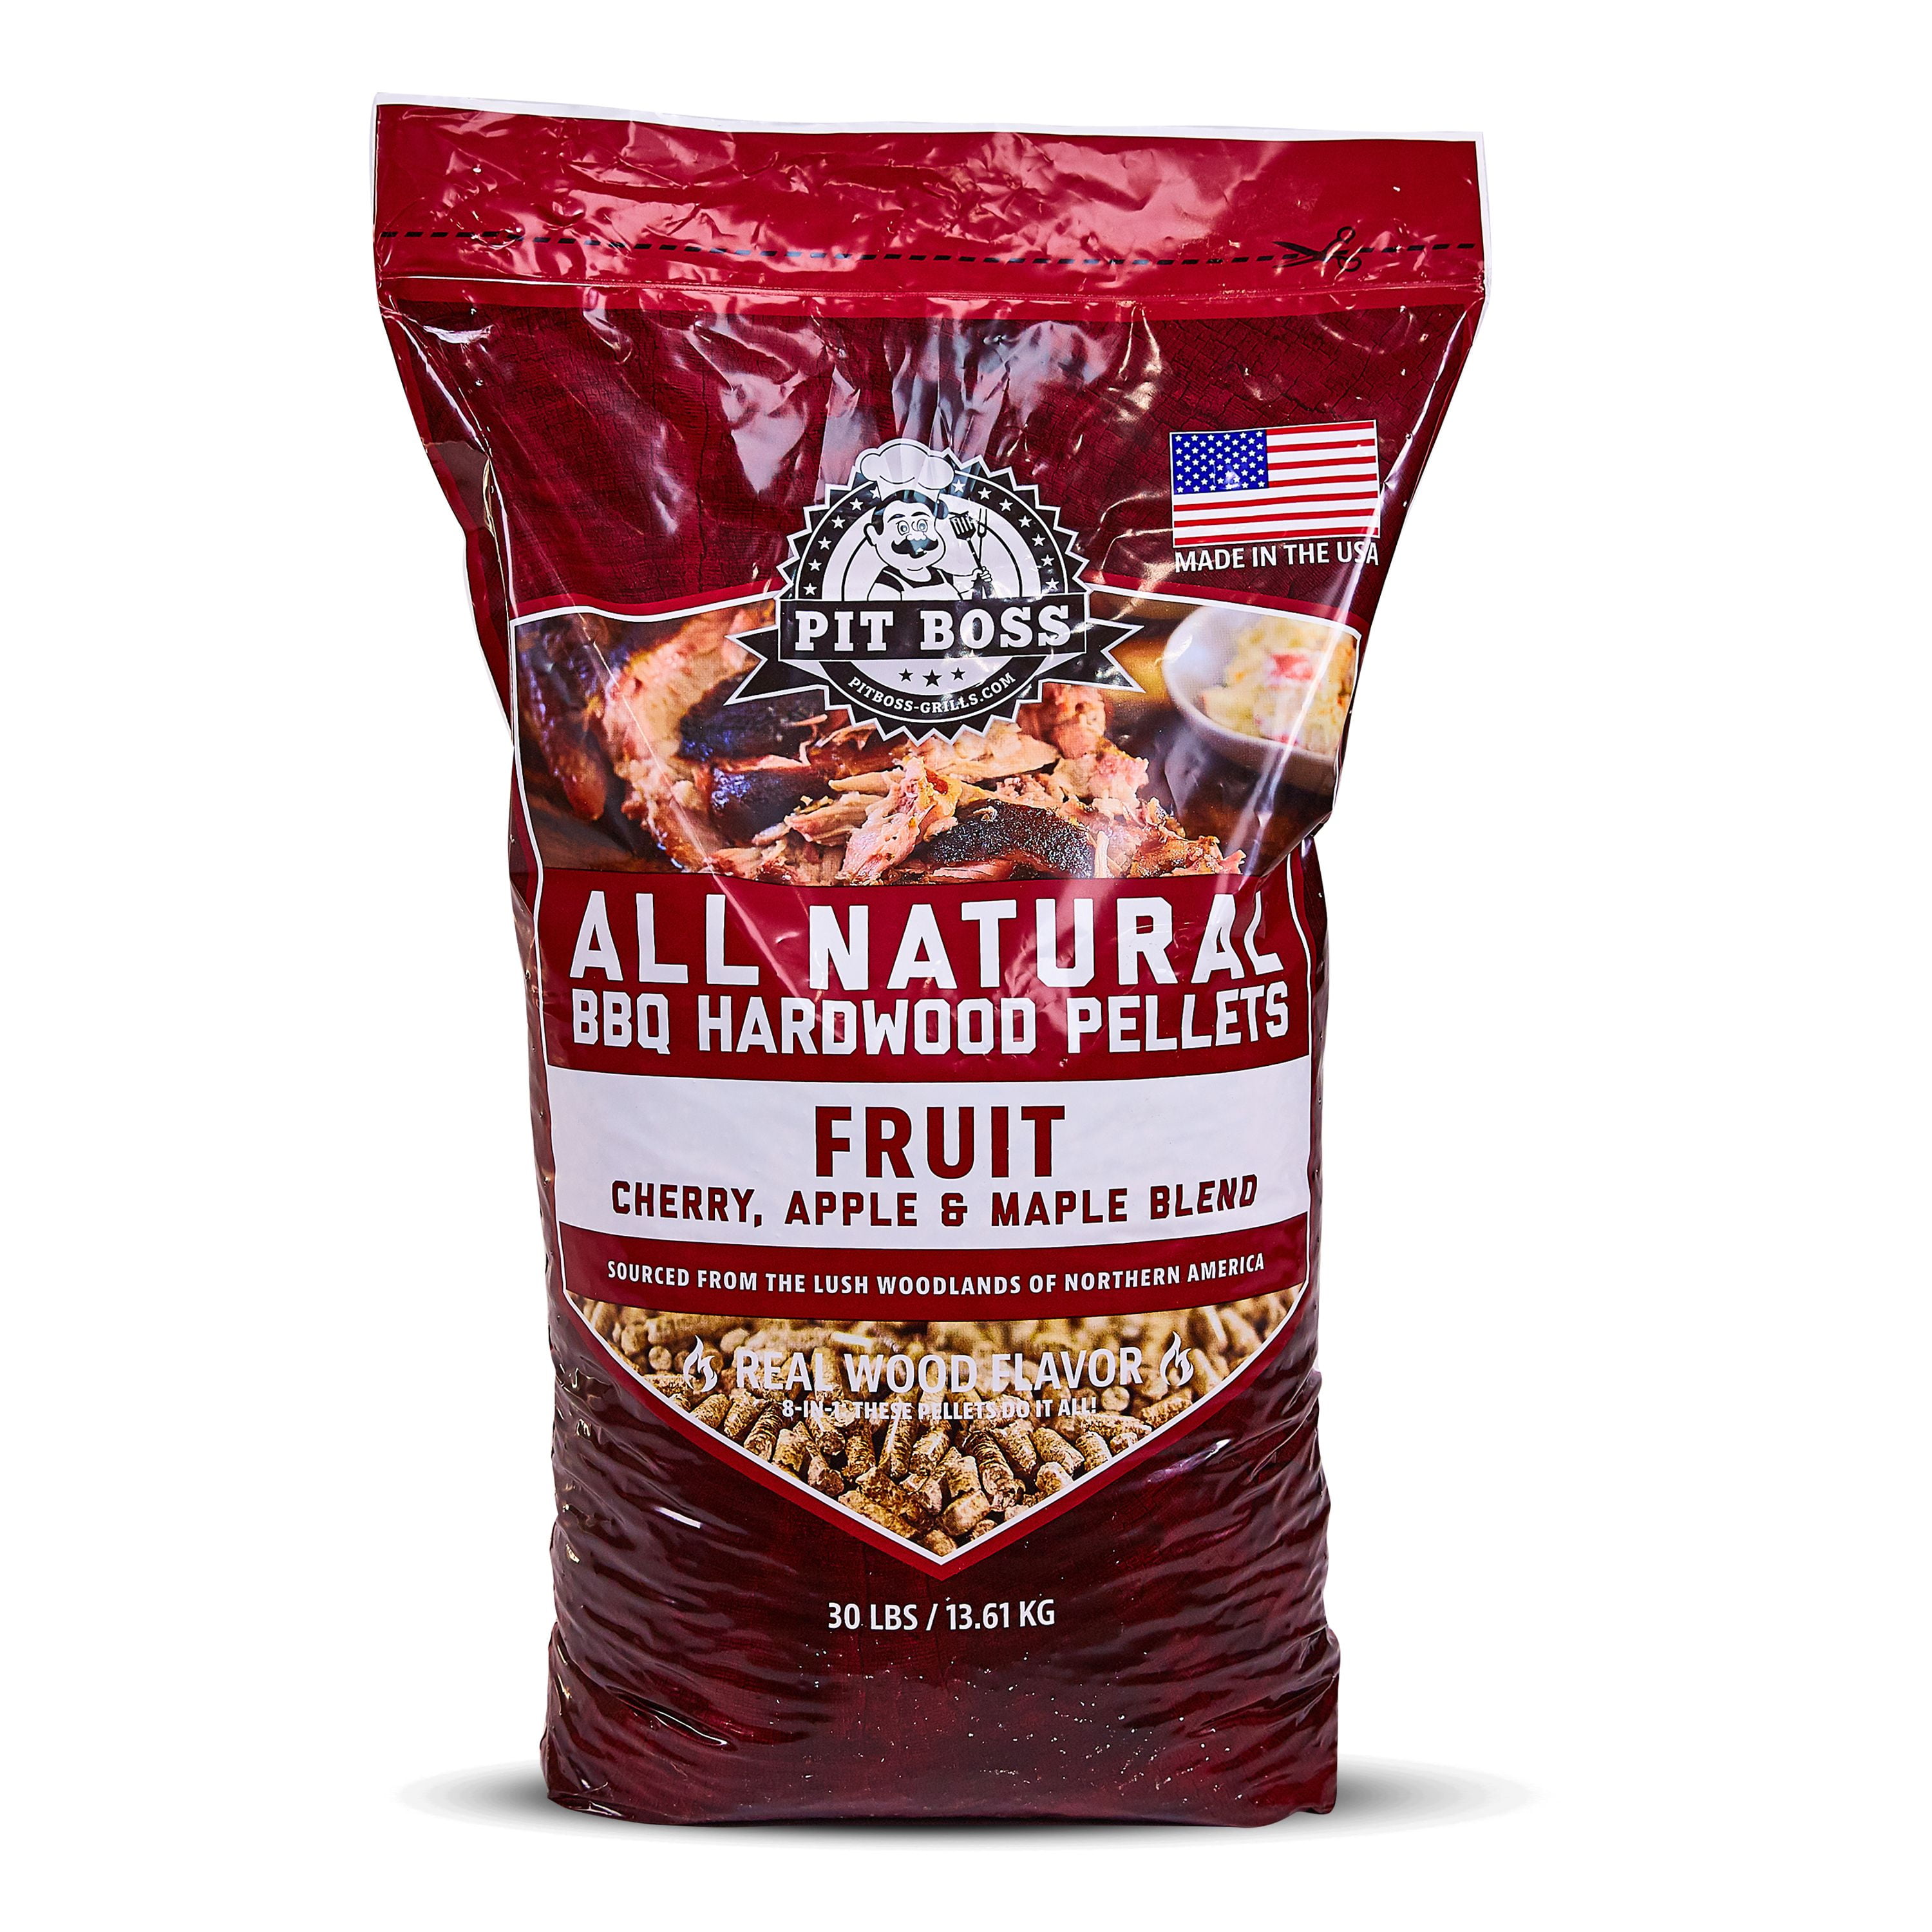 Two pack BBQ Grilling Pellets Hickory Hardwood Resealable Bag 20 lbs x 2 